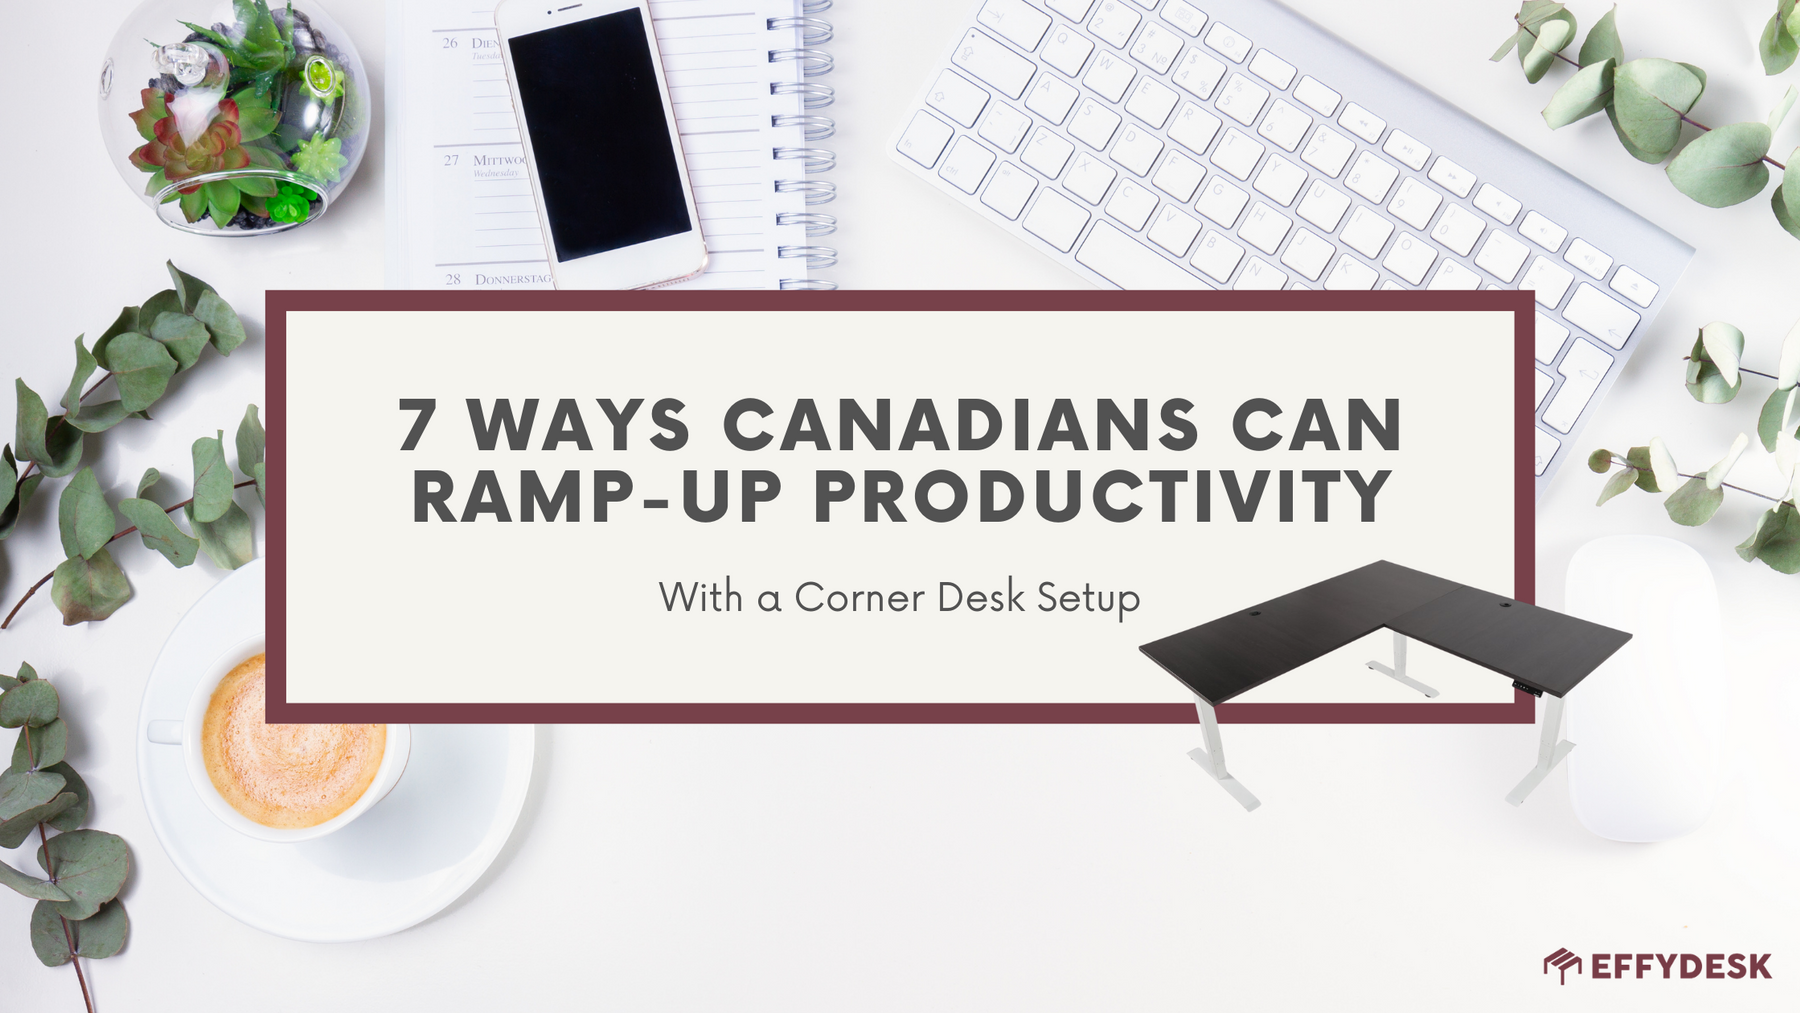 7 Ways Canadians Can Ramp-Up Productivity with a Corner Desk Setup